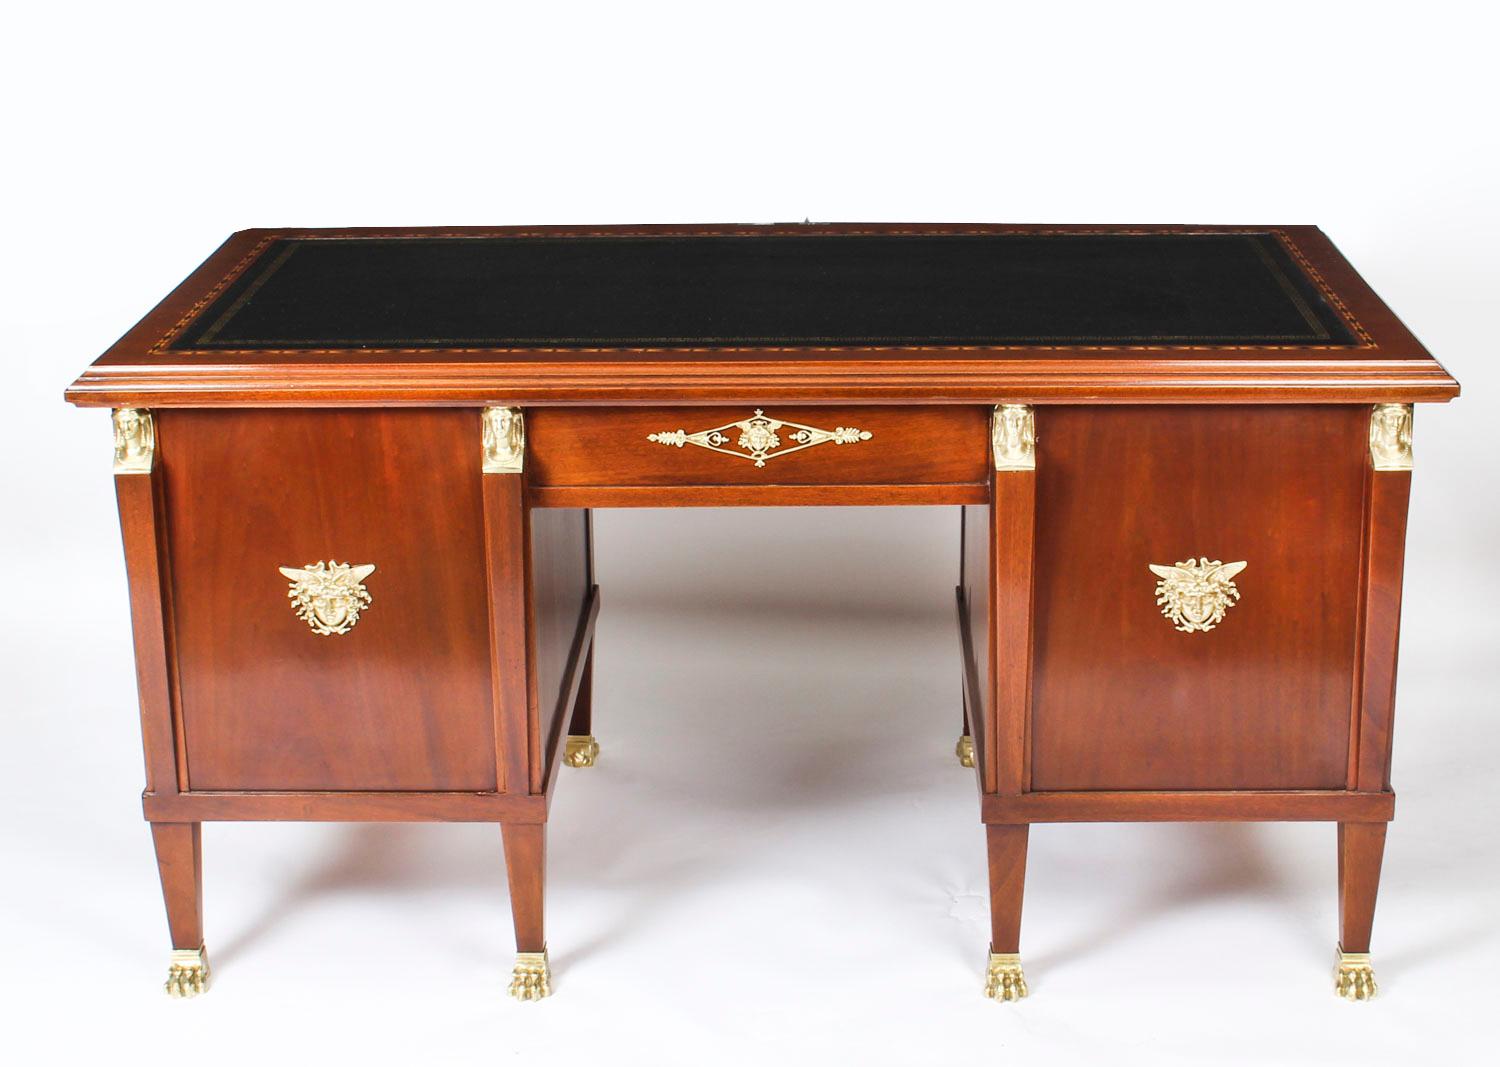 Antique French Empire Revival Ormolu Mounted Desk, 19th Century For Sale 11